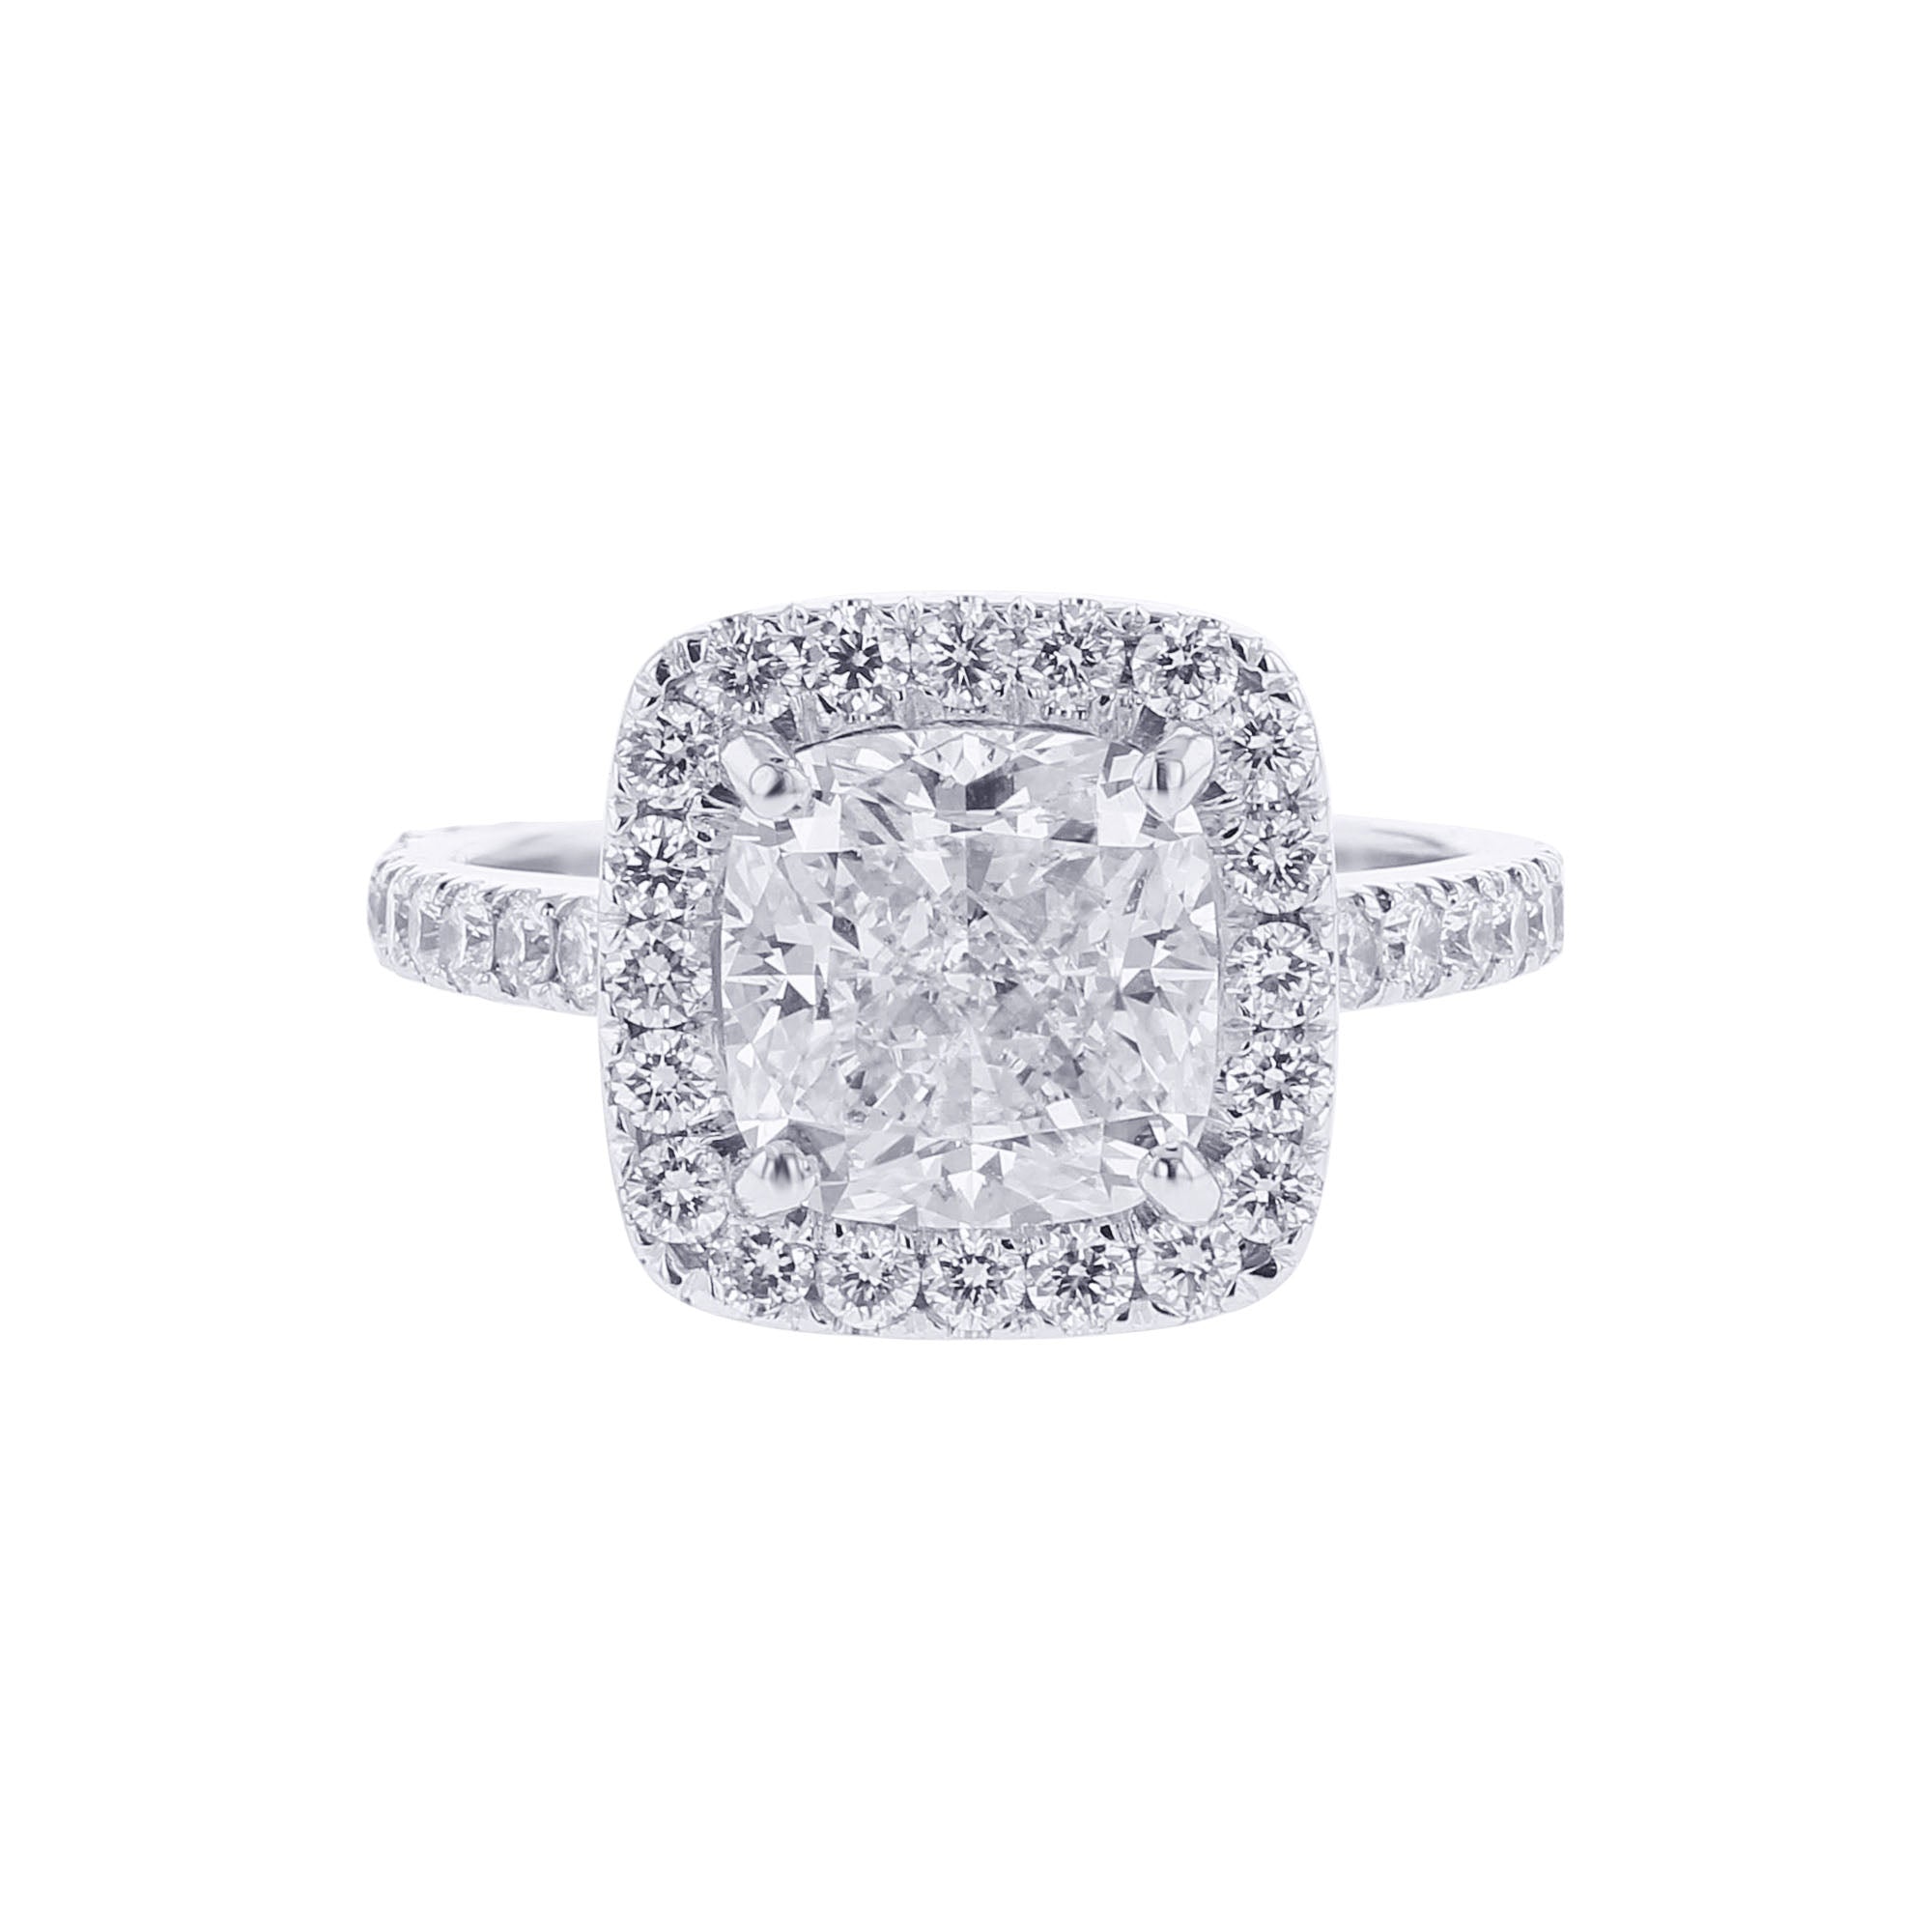 Giselle Certified Ready for Love Diamond Engagement Ring